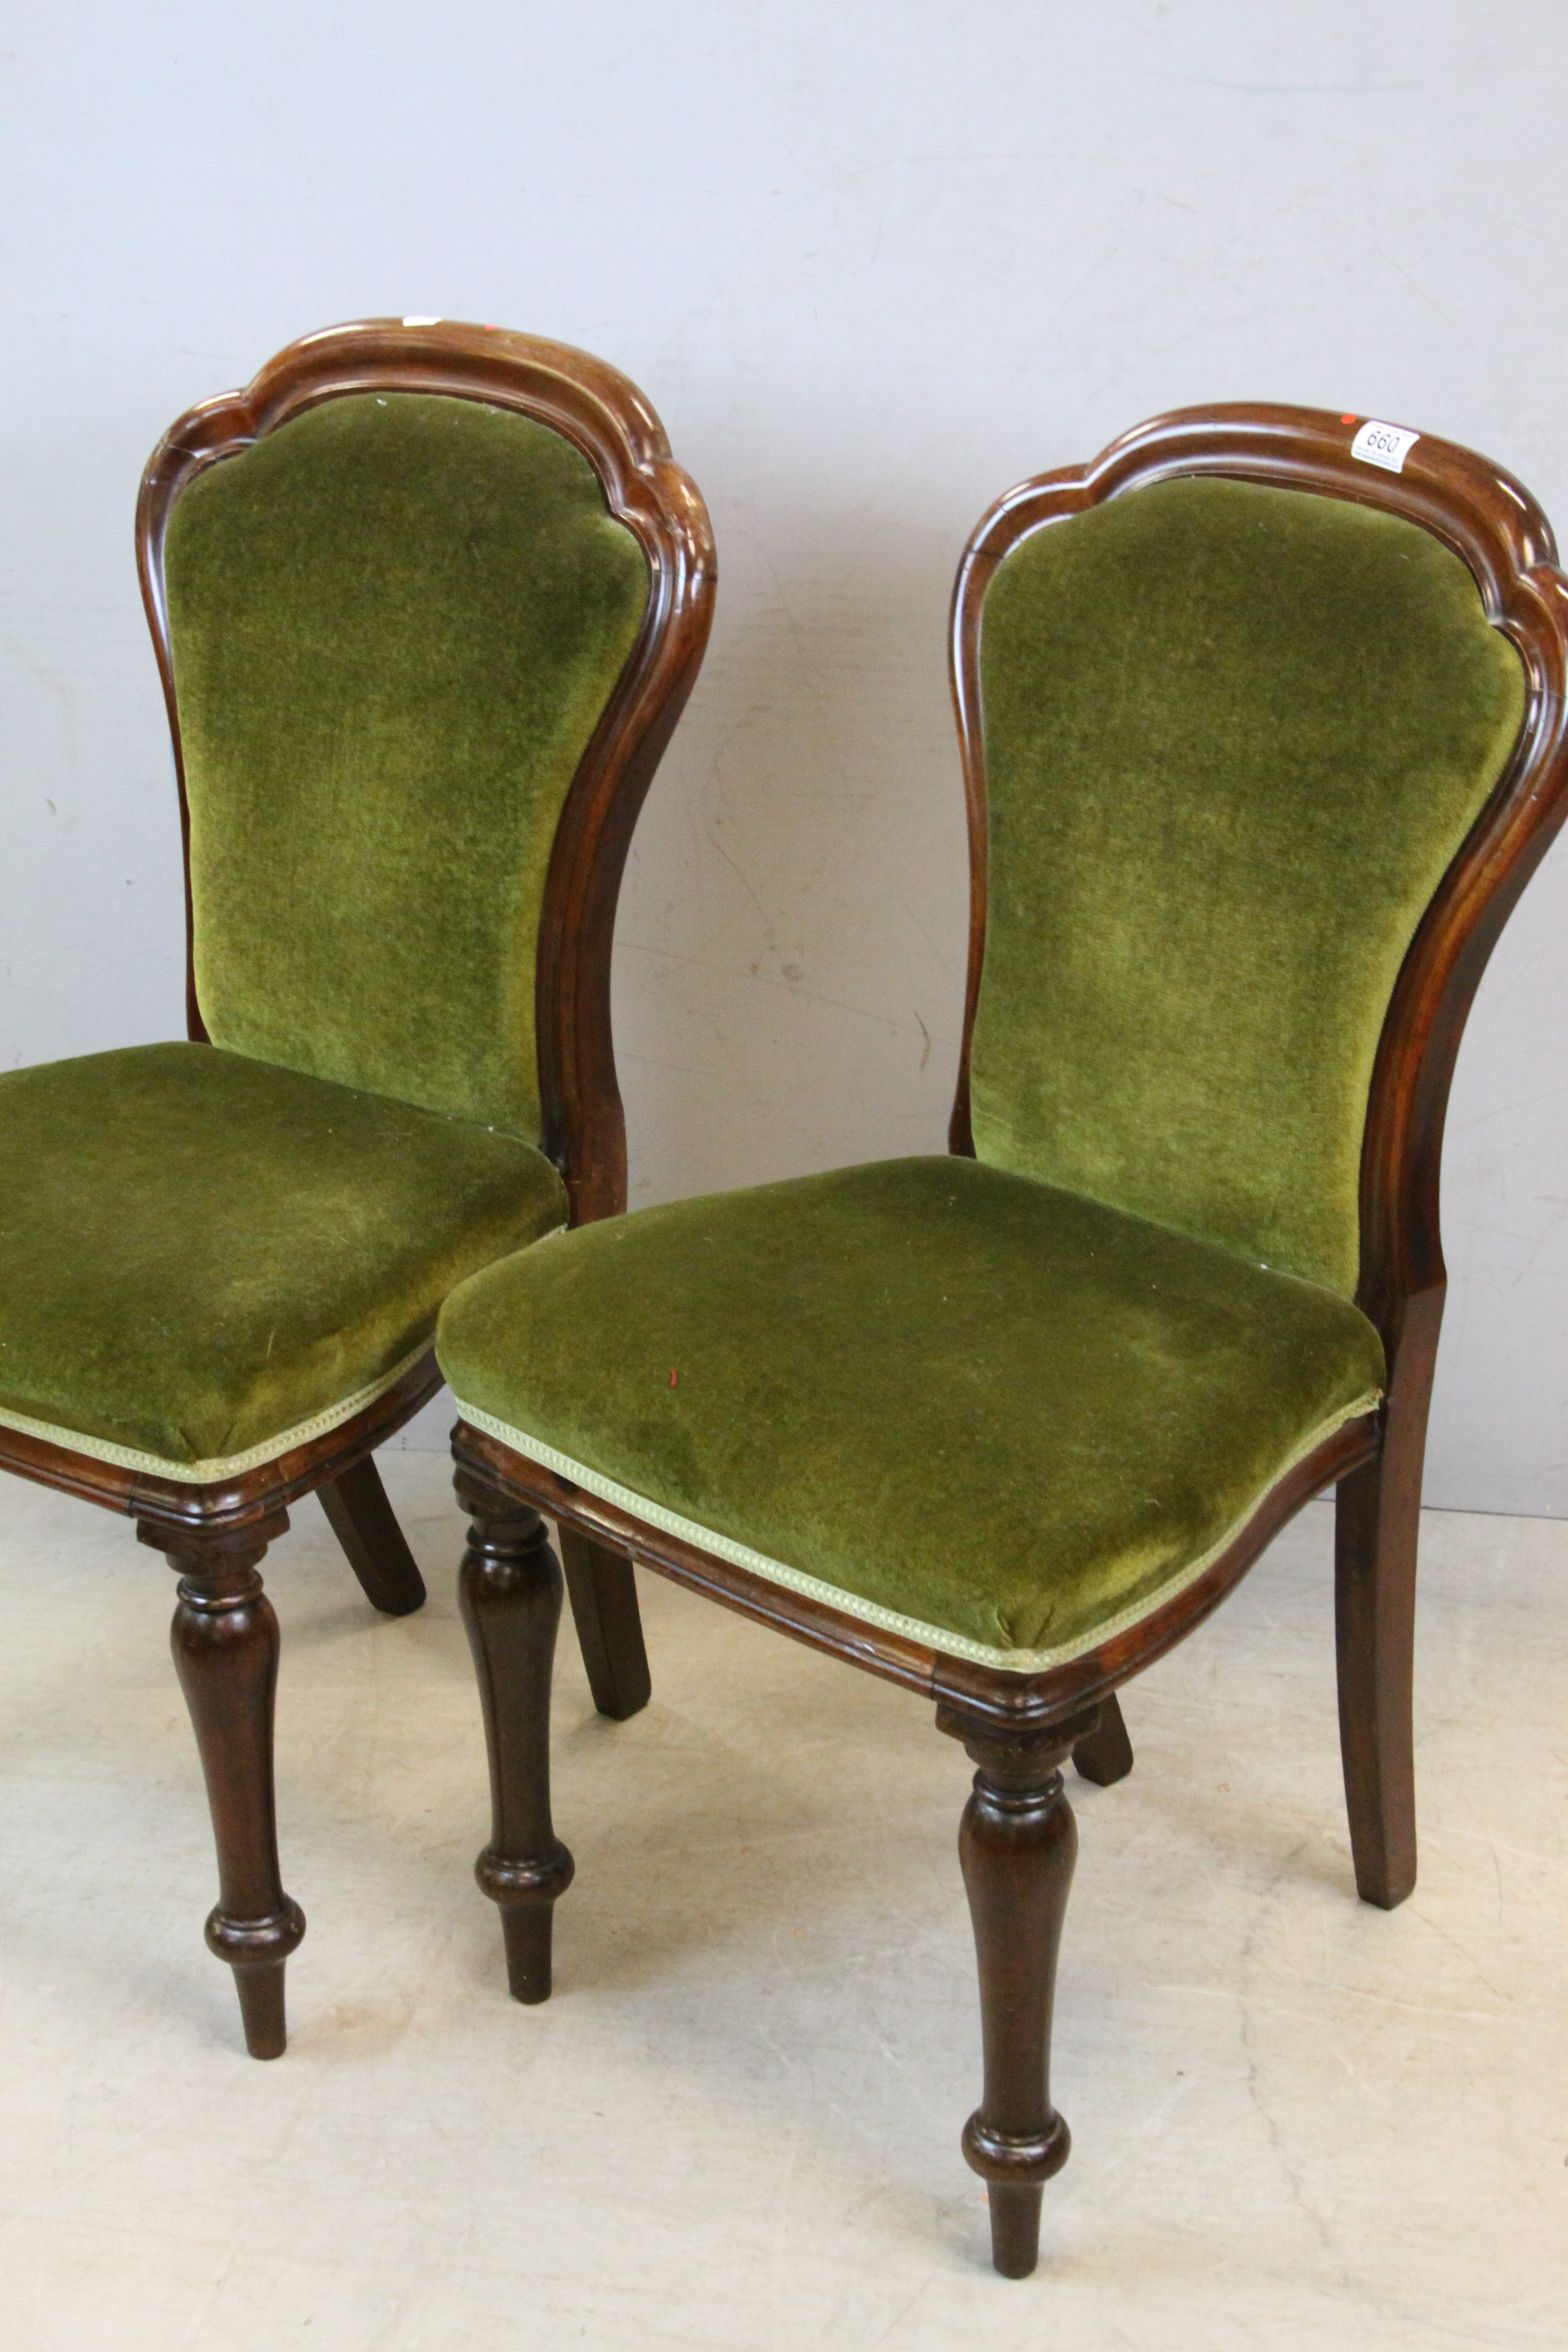 Pair of Victorian Mahogany Spoon Back Dining Chairs with Green Upholstered Backs and Seats - Image 2 of 3